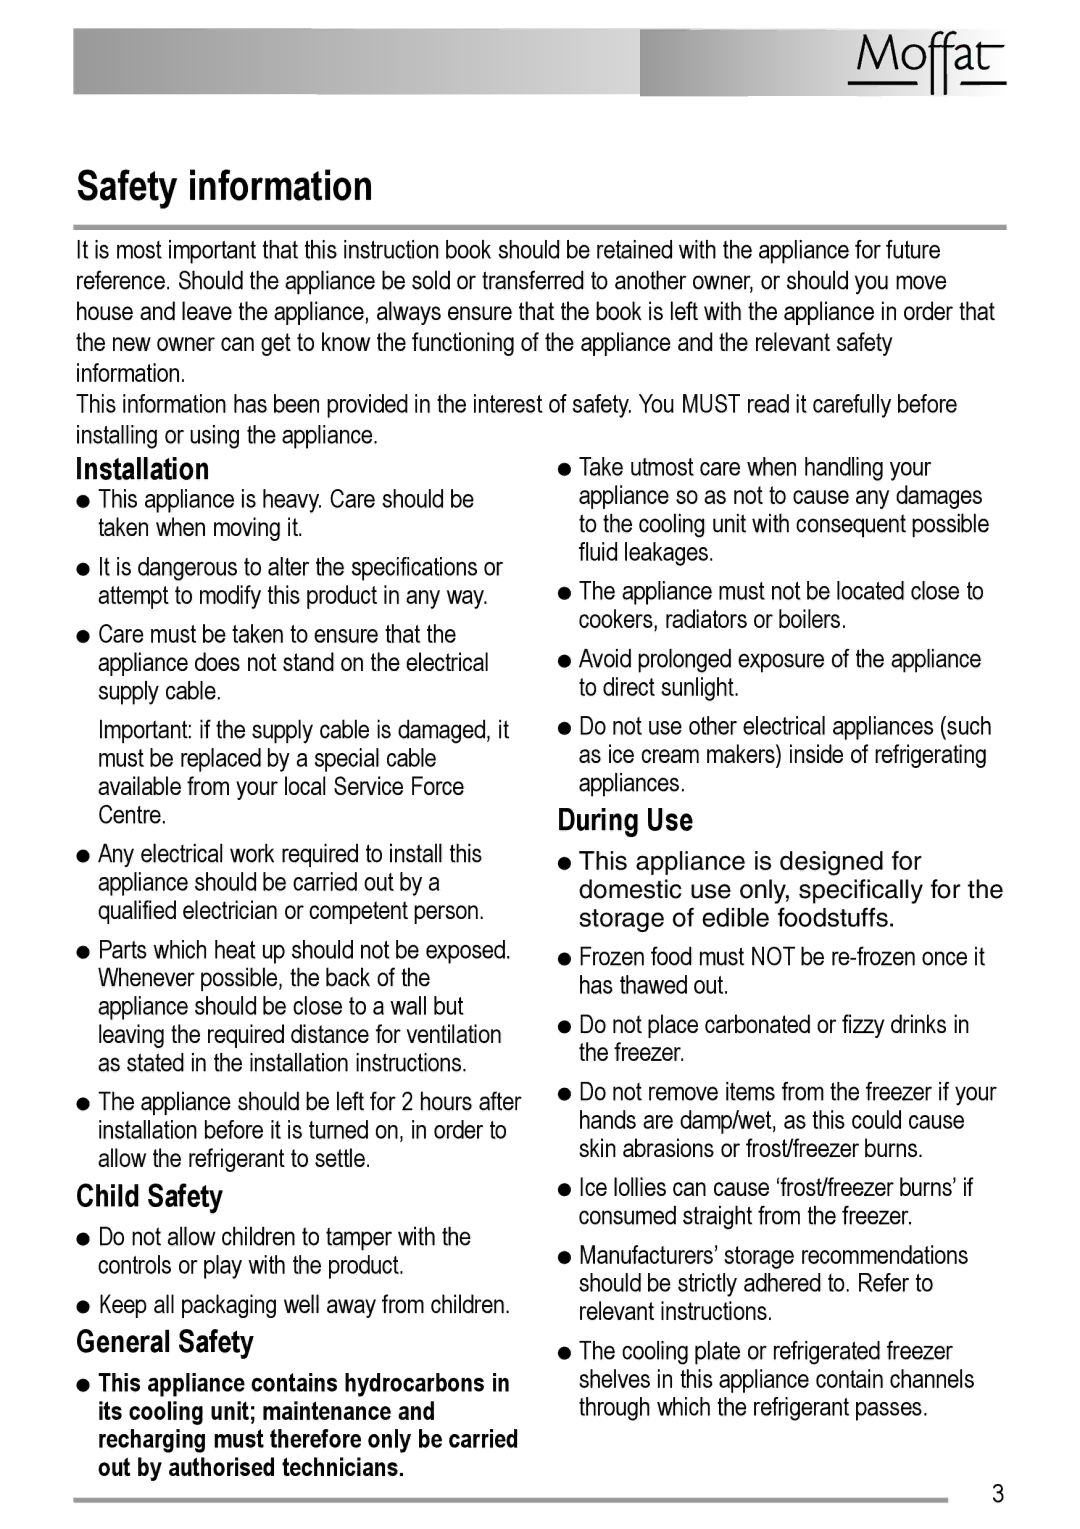 Electrolux U29065 user manual Safety information, Installation, Child Safety, General Safety, During Use 